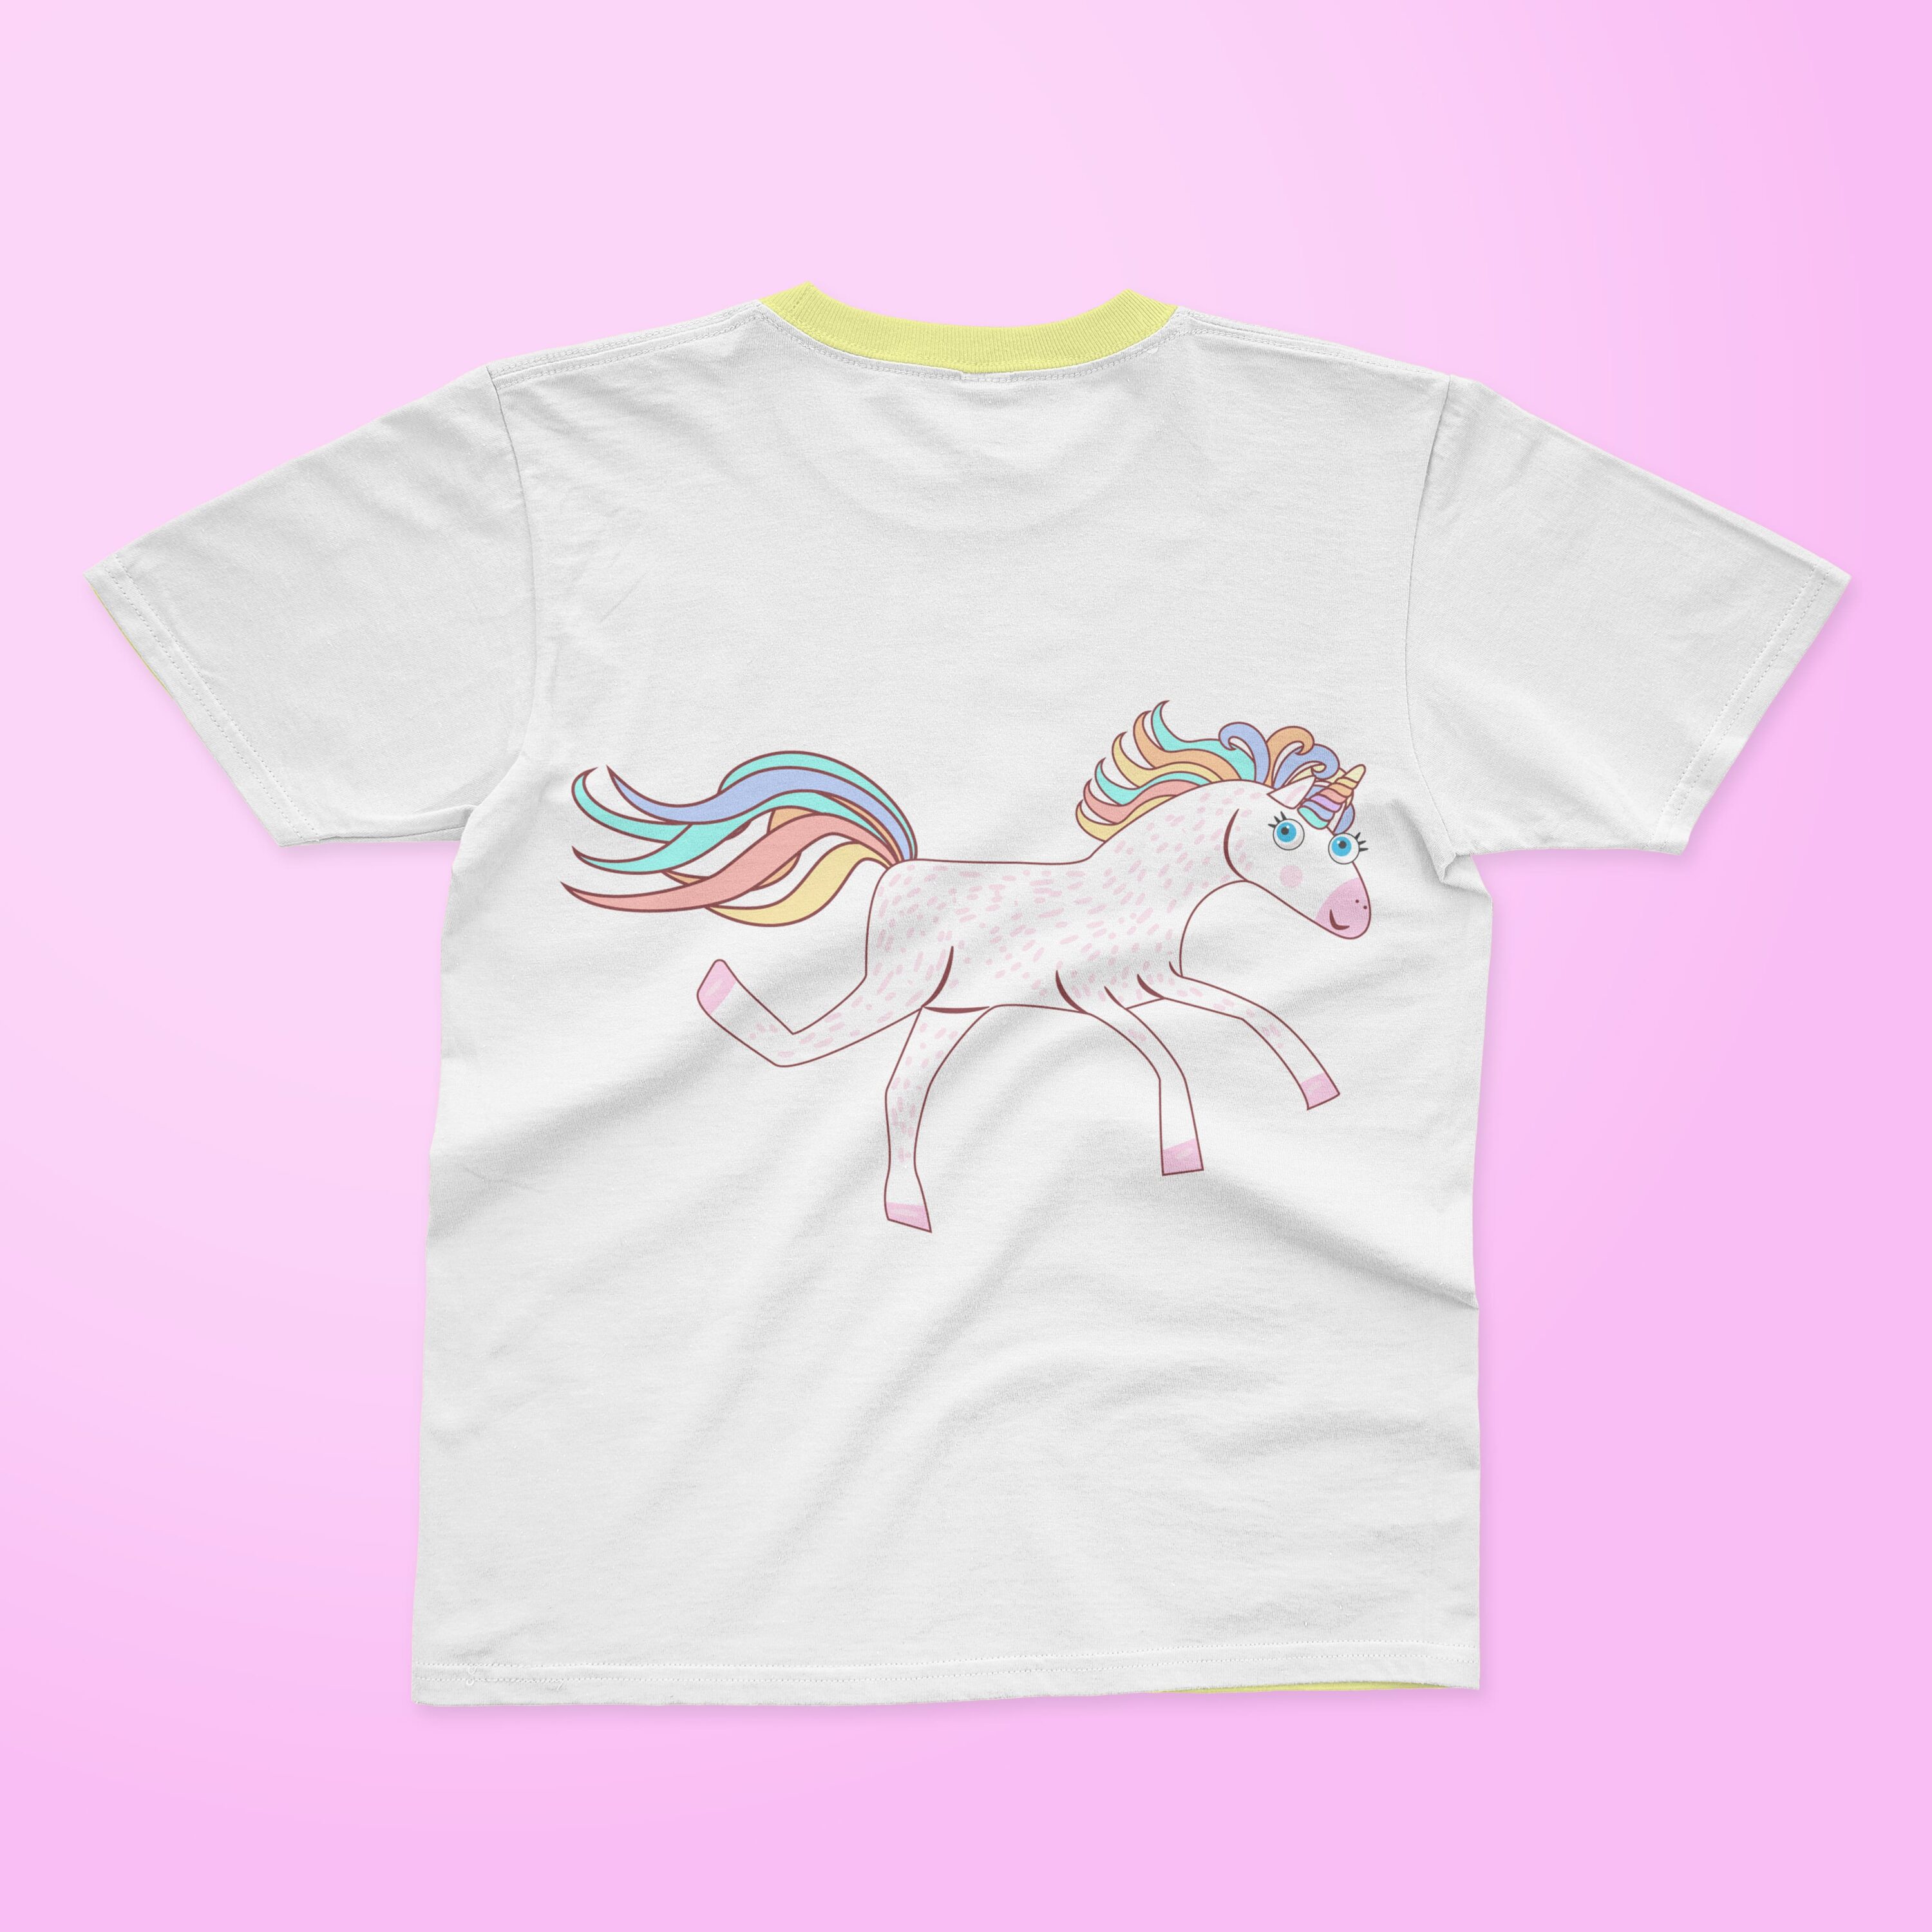 White t-shirt with a yellow collar and a cute running unicorn on a pink background.